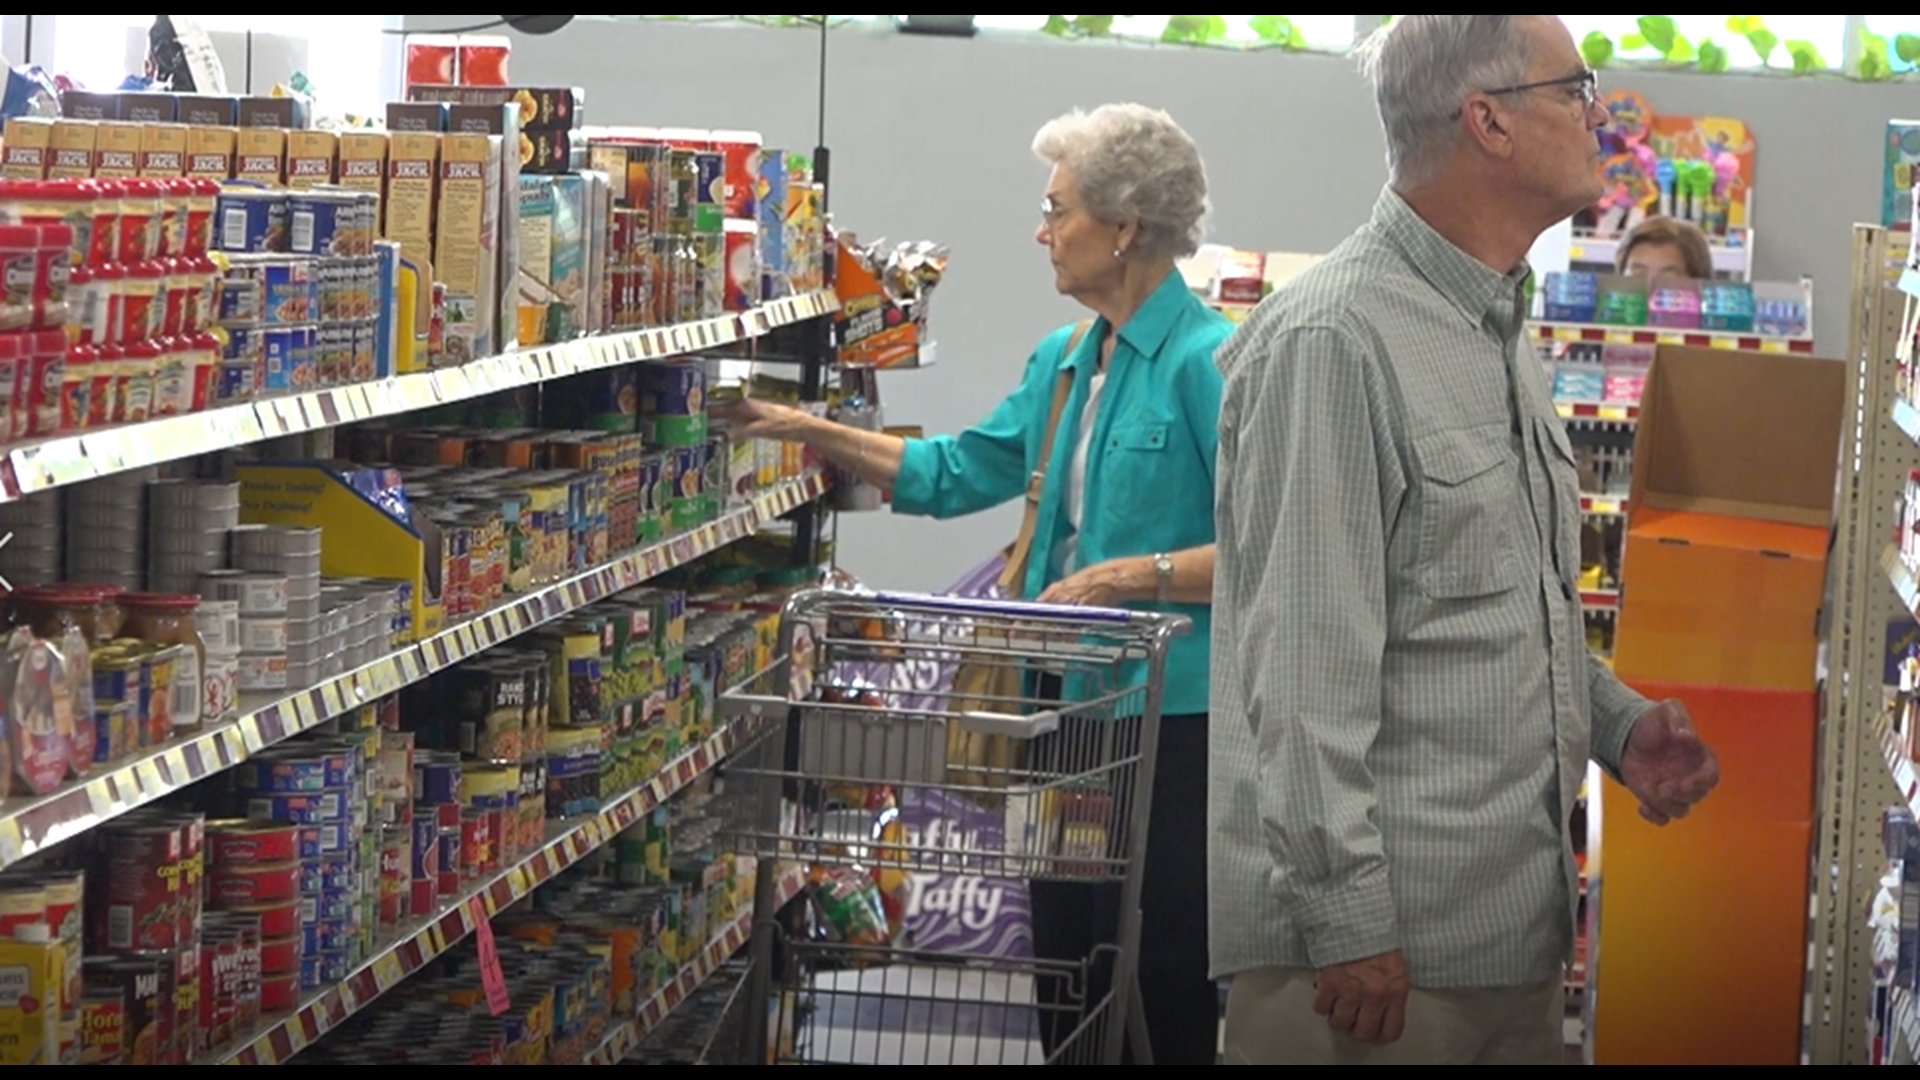 A Waco pastor encouraged 100 middle-class people to shop at the Jubilee Food market once a month.